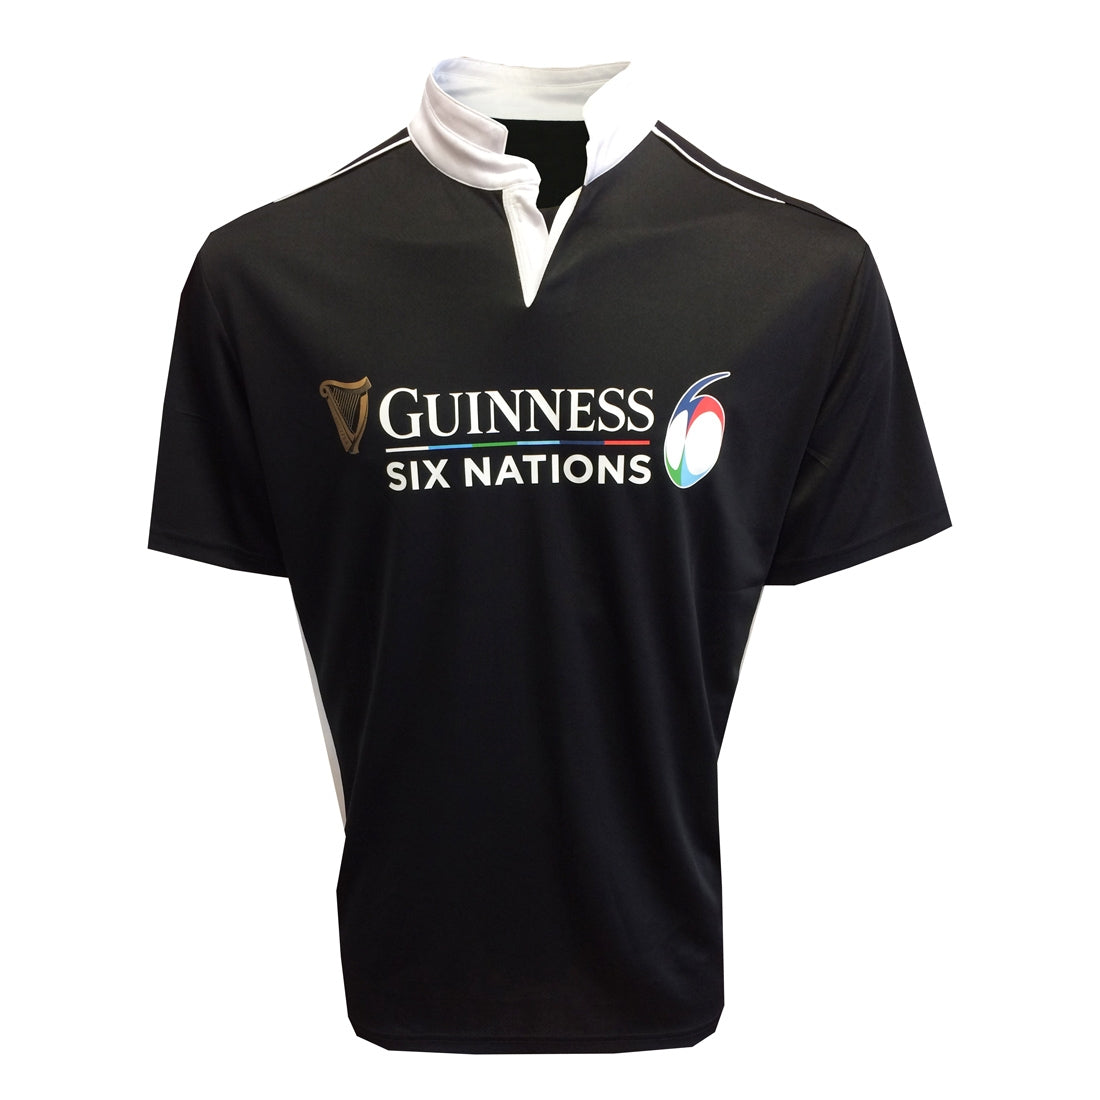 The Guinness 6 Nations Performance Rugby Jersey, from Guinness UK, is a must-have for any Six Nations fan.